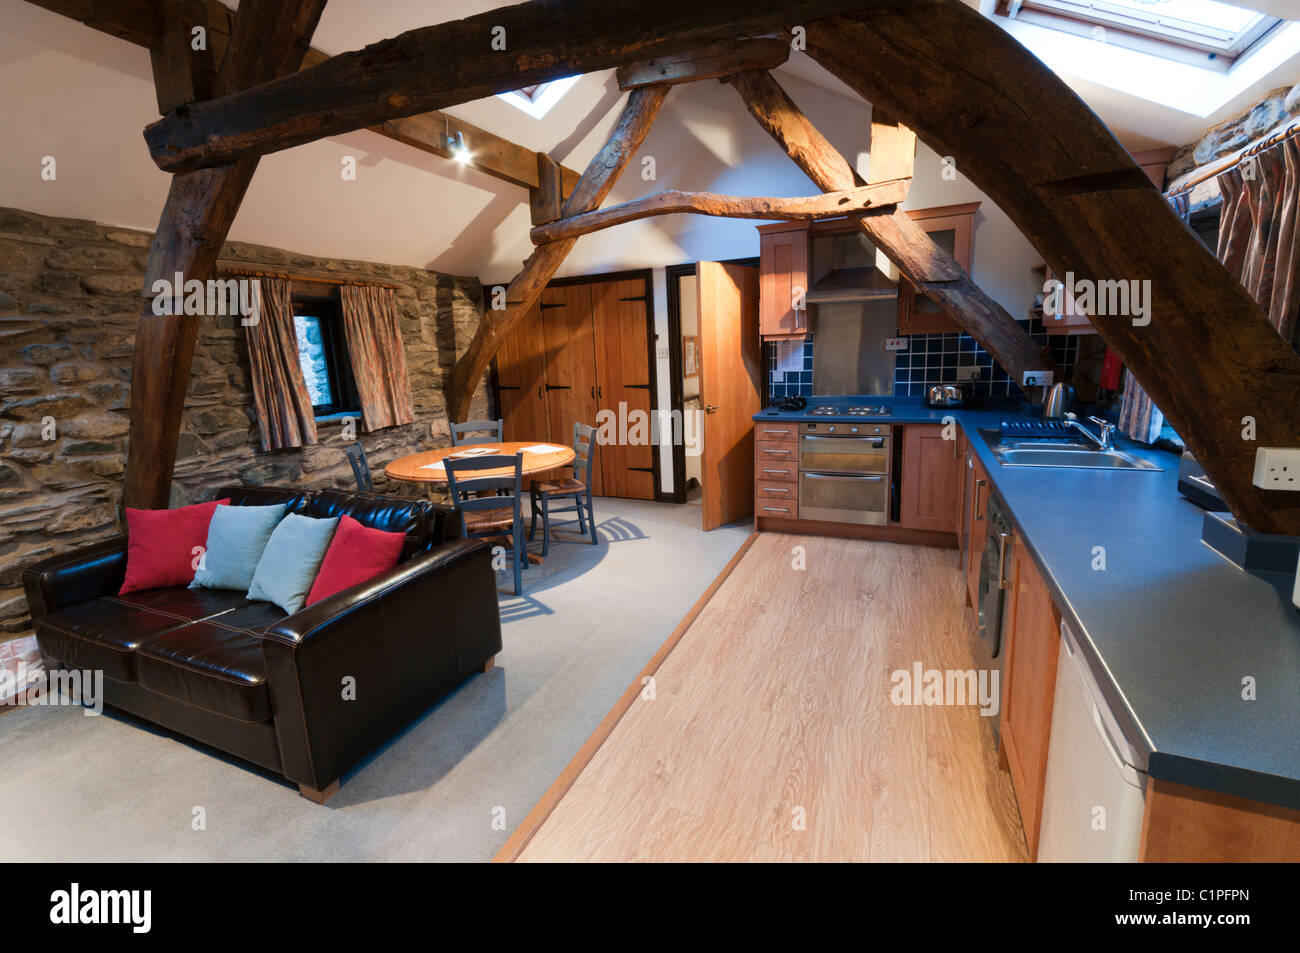 The Cruck Barn self-catering holiday accommodation in Grisedale in the English Lake District near Patterdale. Stock Photo